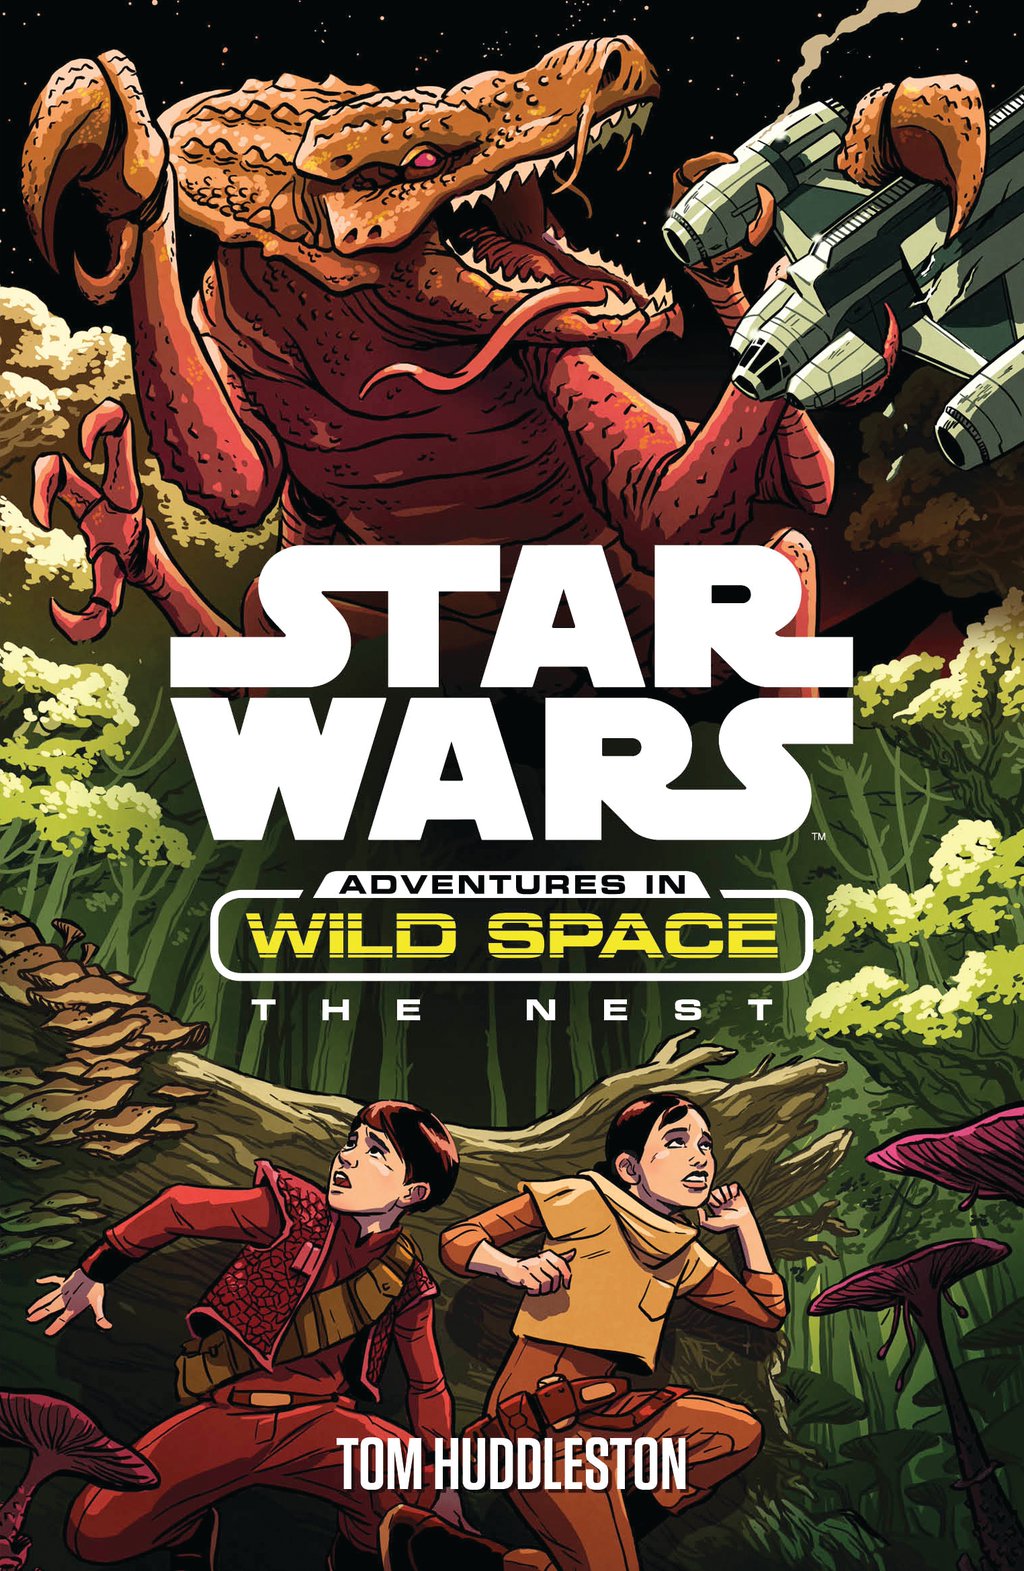 Adventures_in_Wild_Space_The_Nest_cover